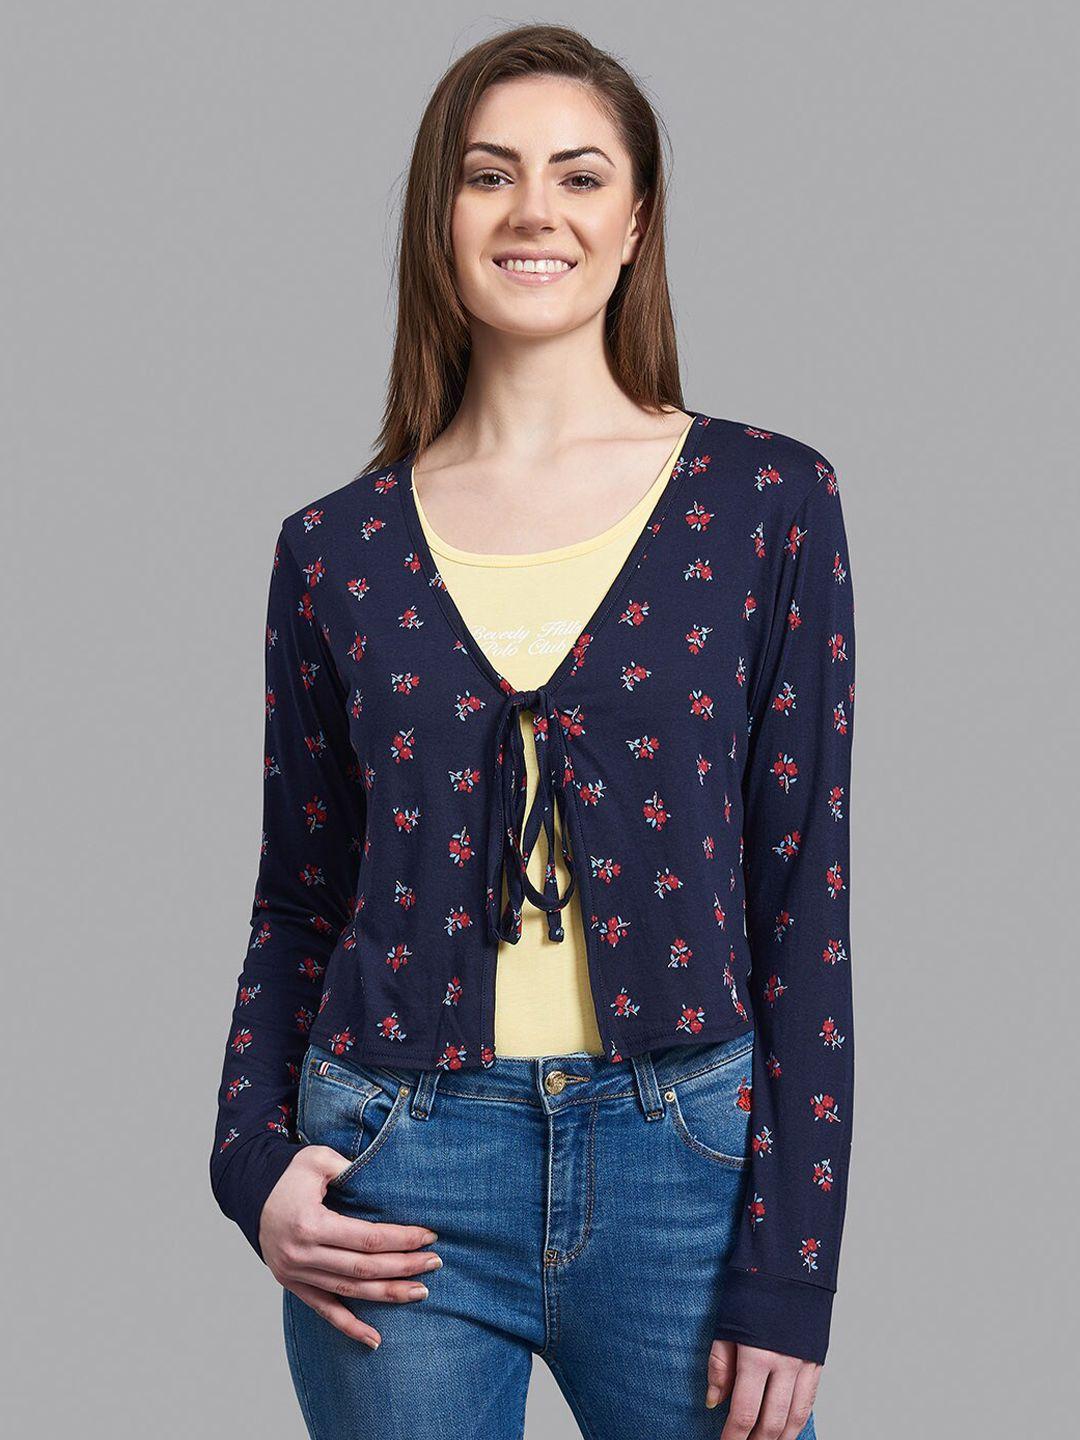 beverly-hills-polo-club-women-navy-blue-&-red-floral-printed-crop-tie-up-shrug